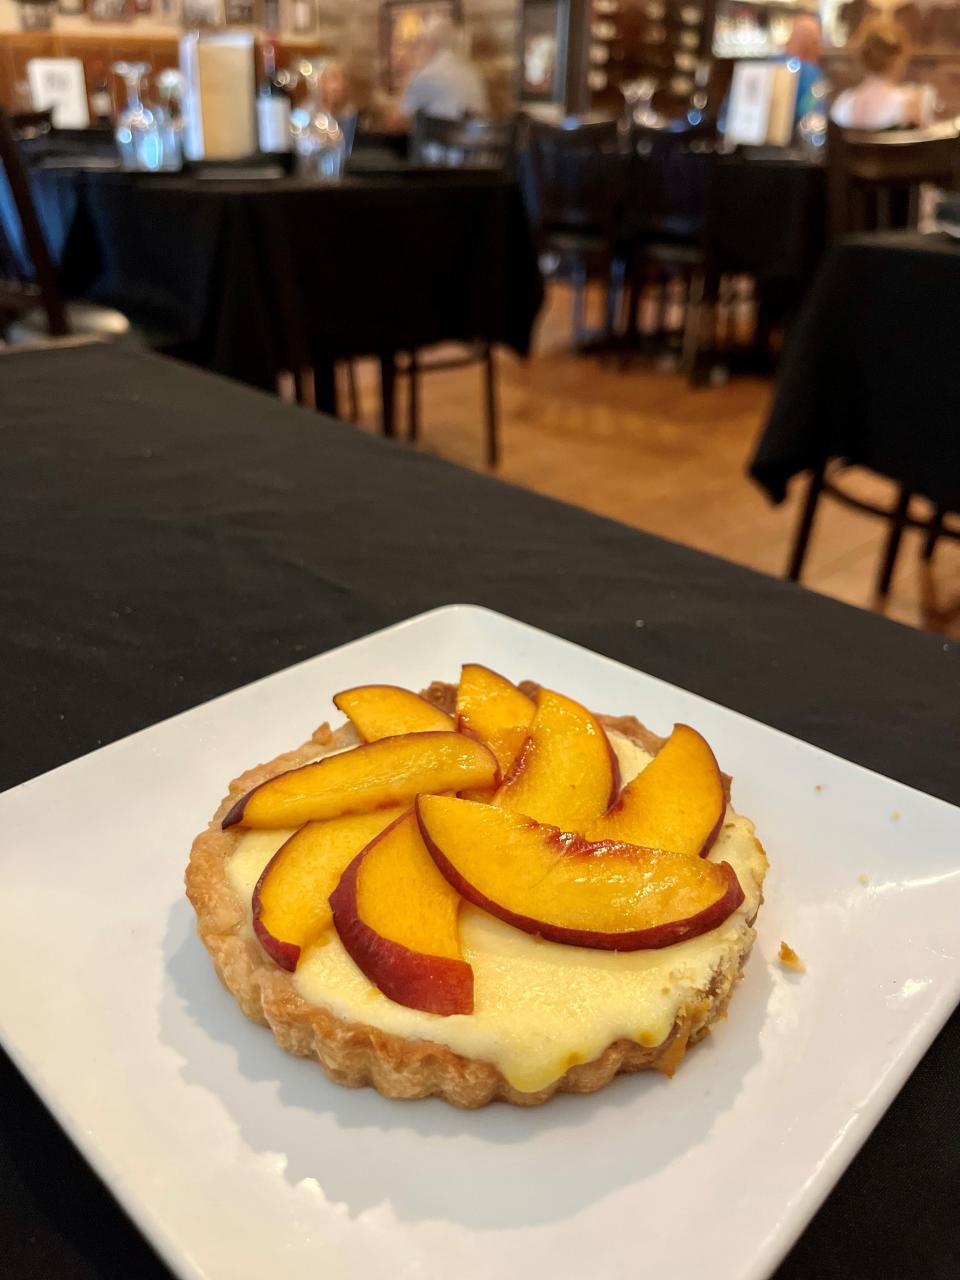 Owner Melissa Fleming makes the desserts, including this ricotta peach tart, at Trattoria Ciao.